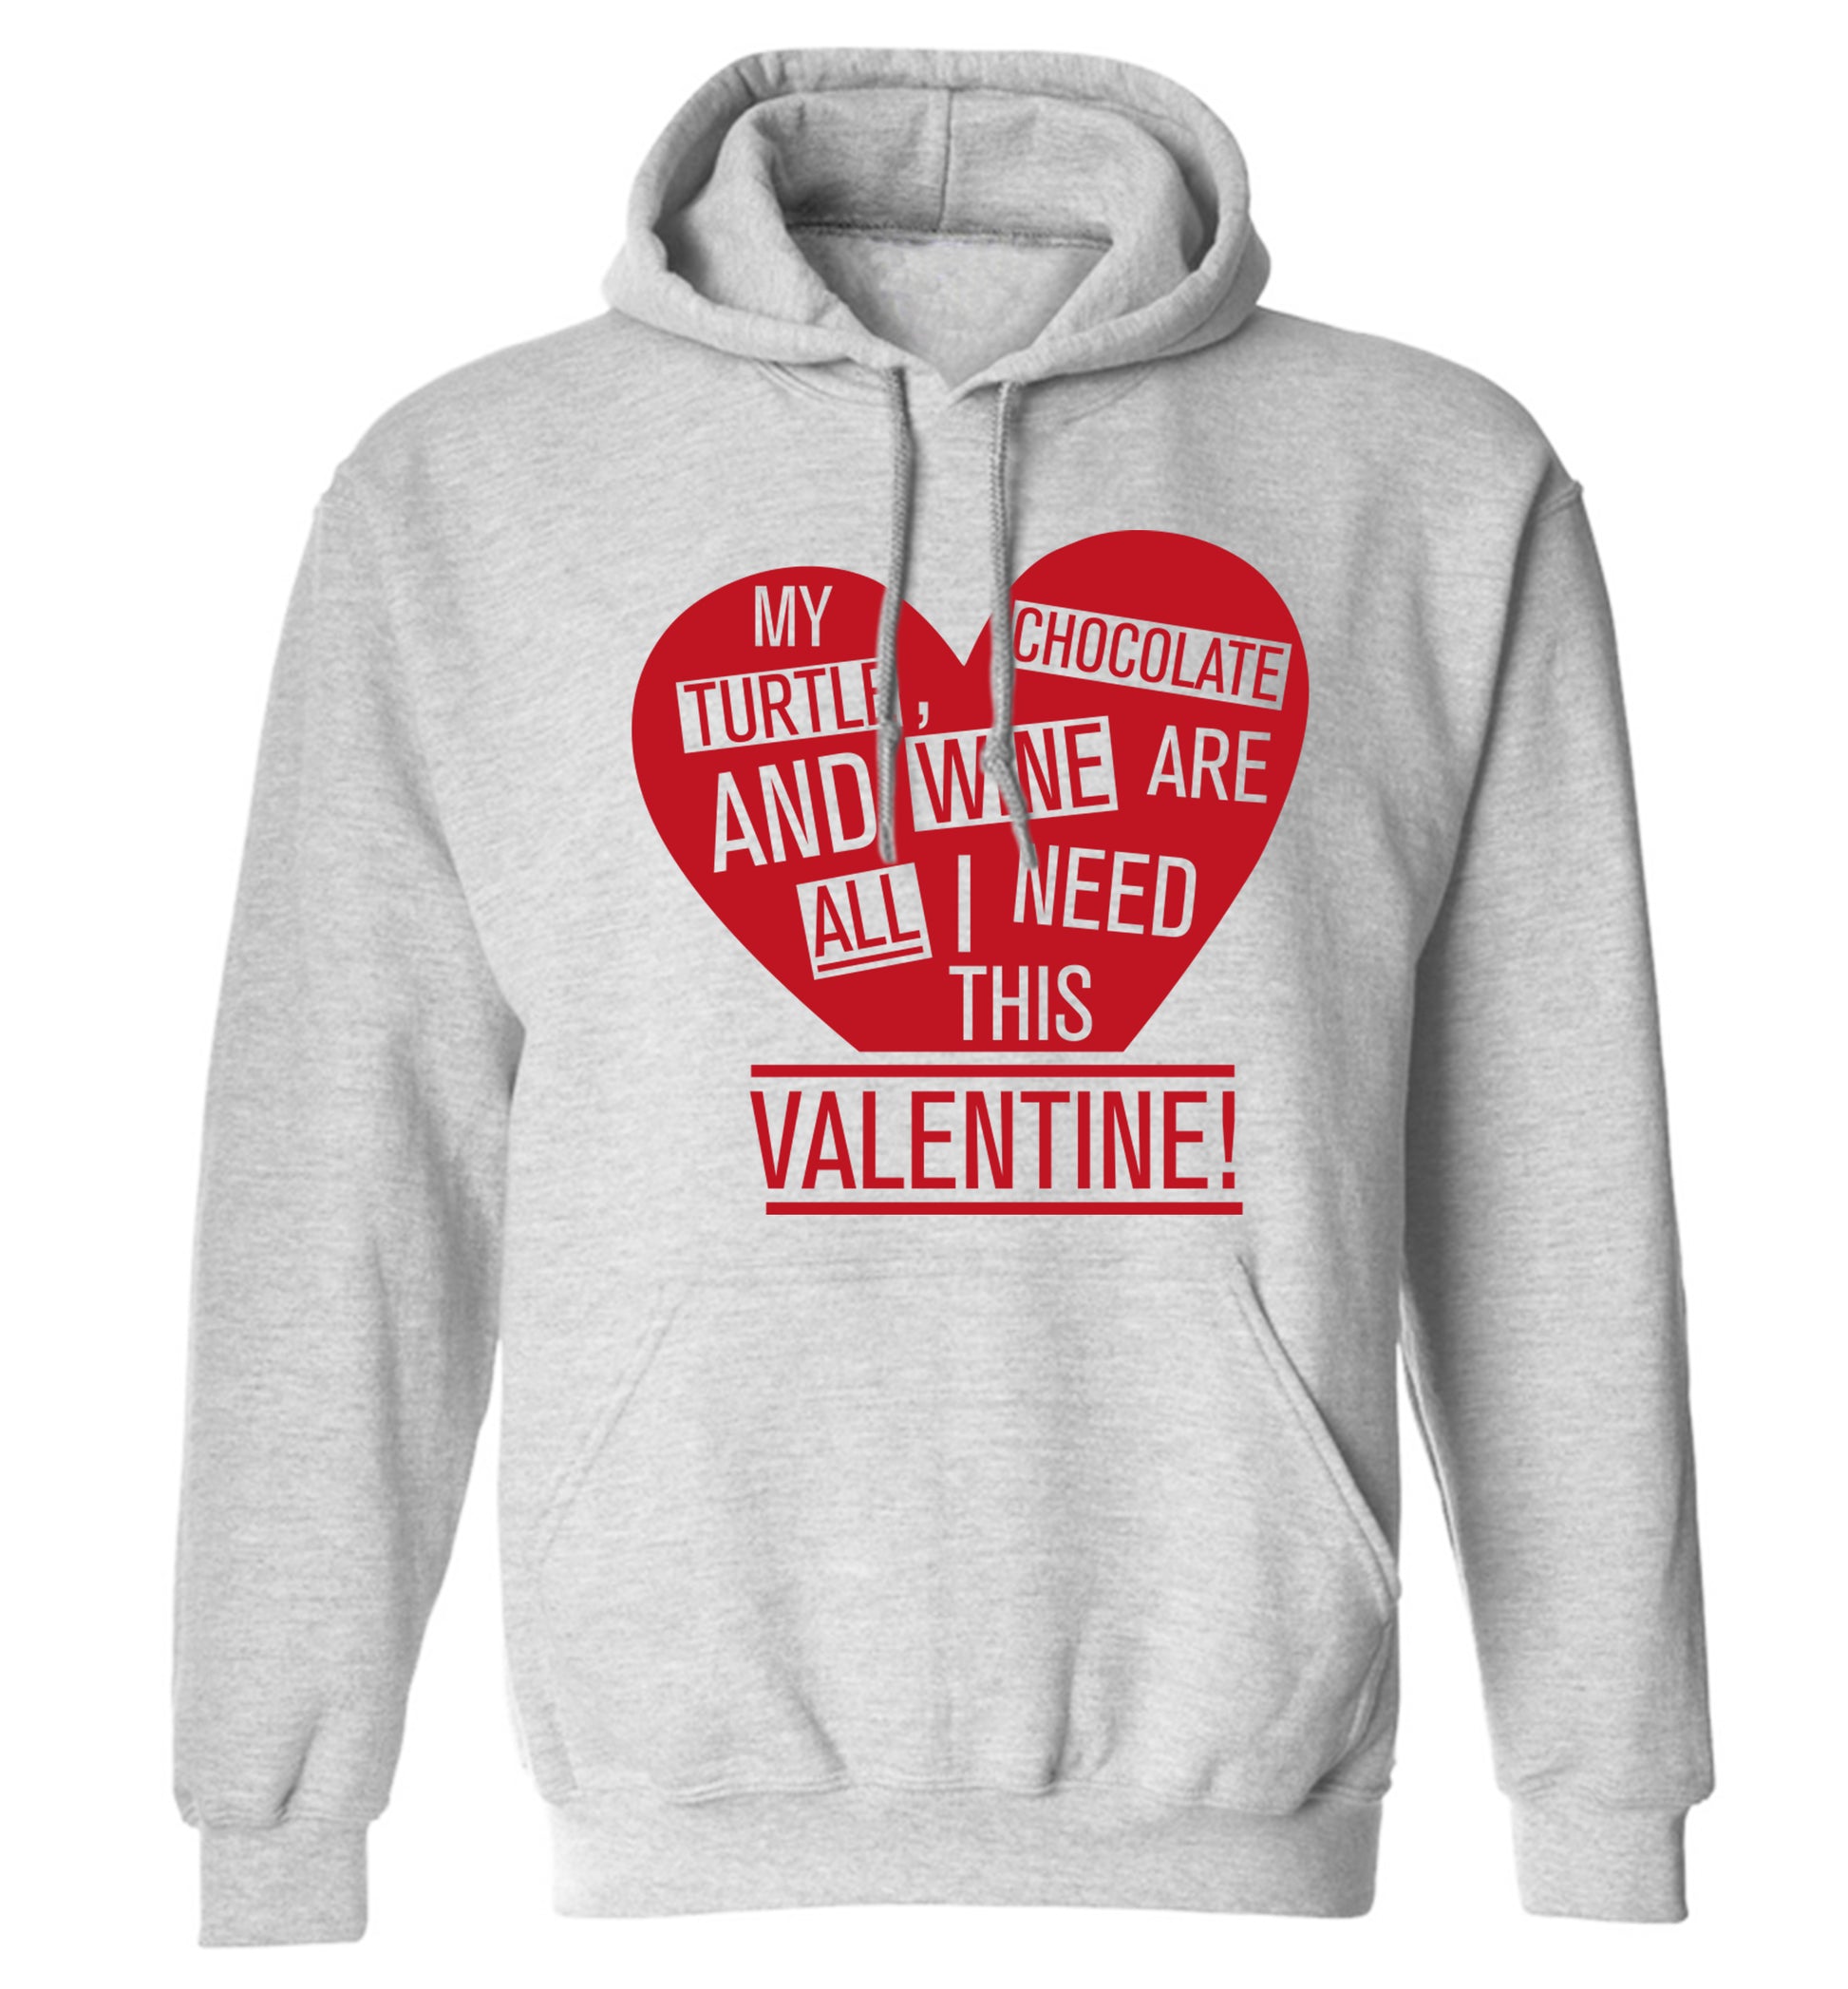 My turtle, chocolate and wine are all I need this valentine! adults unisex grey hoodie 2XL